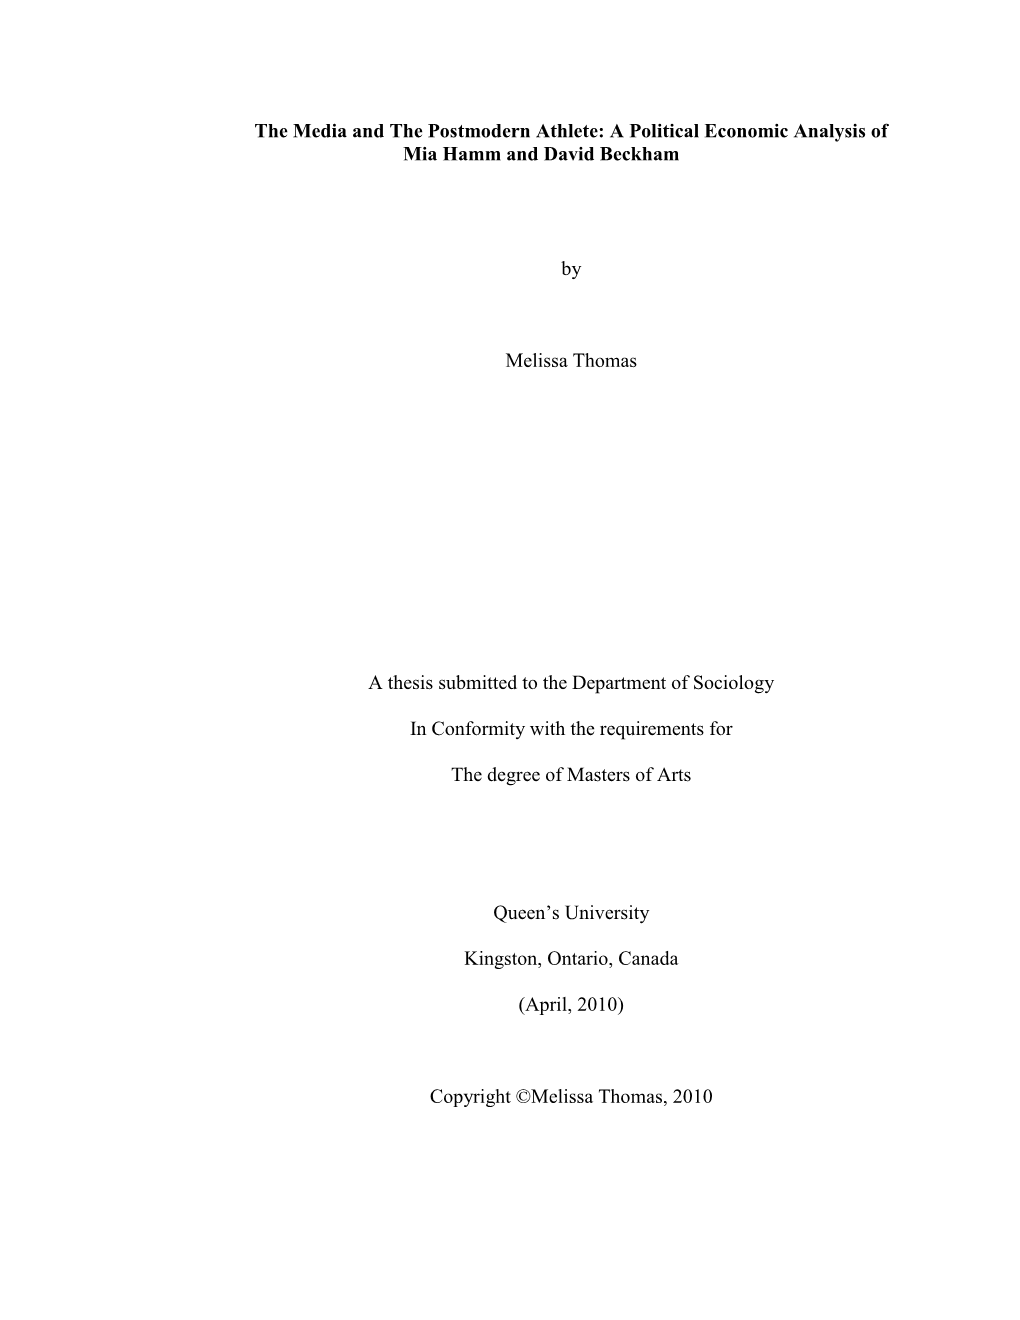 A Political Economic Analysis of Mia Hamm and David Beckham by Melissa Thomas a Thesis